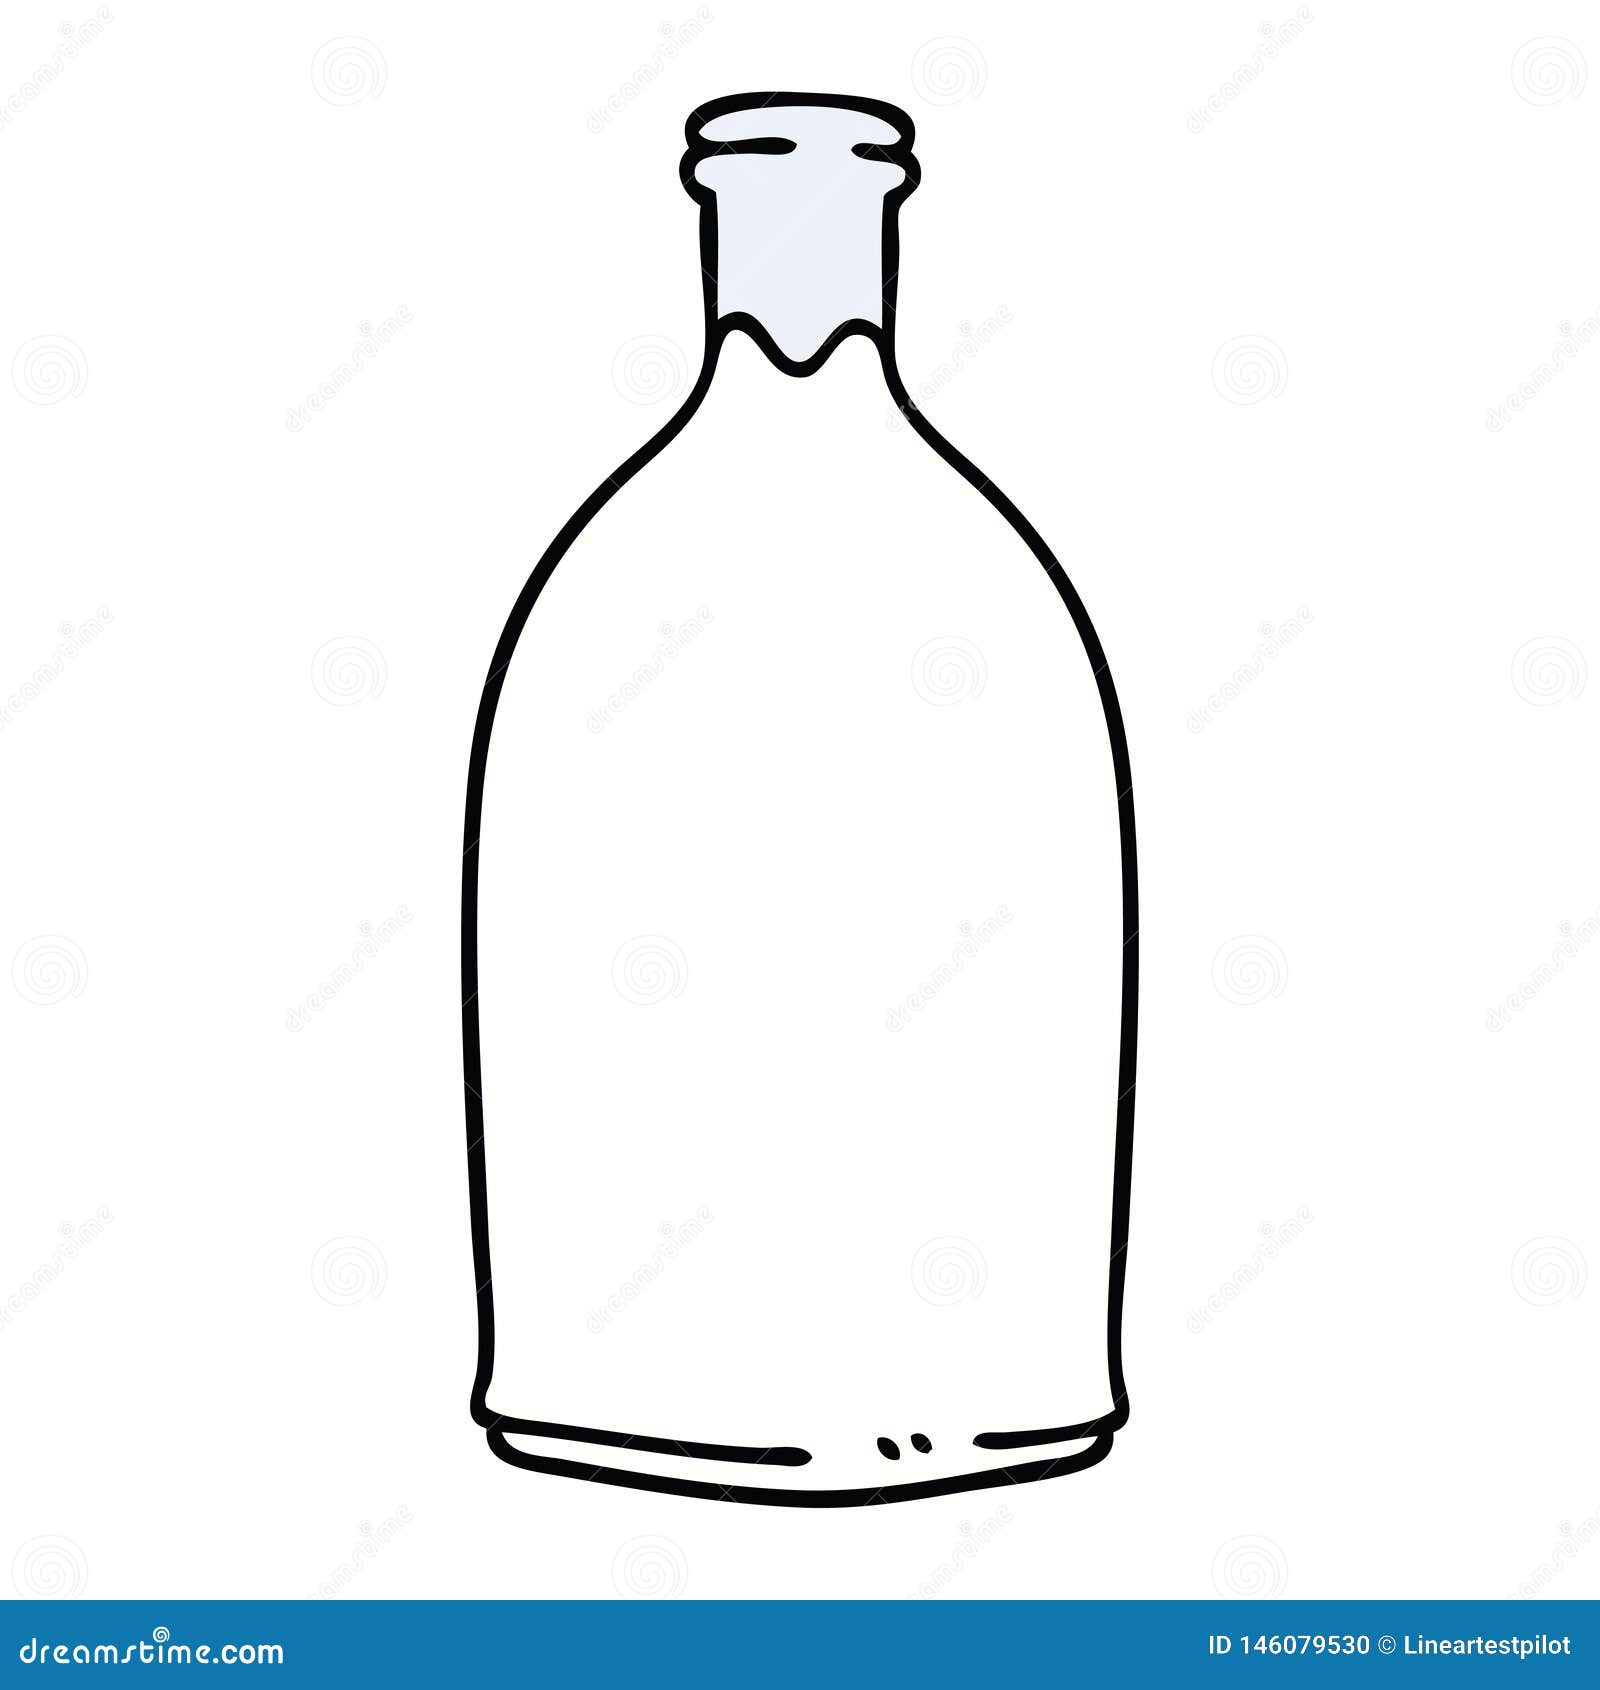 https://thumbs.dreamstime.com/z/hand-drawn-quirky-cartoon-milk-bottle-illustrated-146079530.jpg